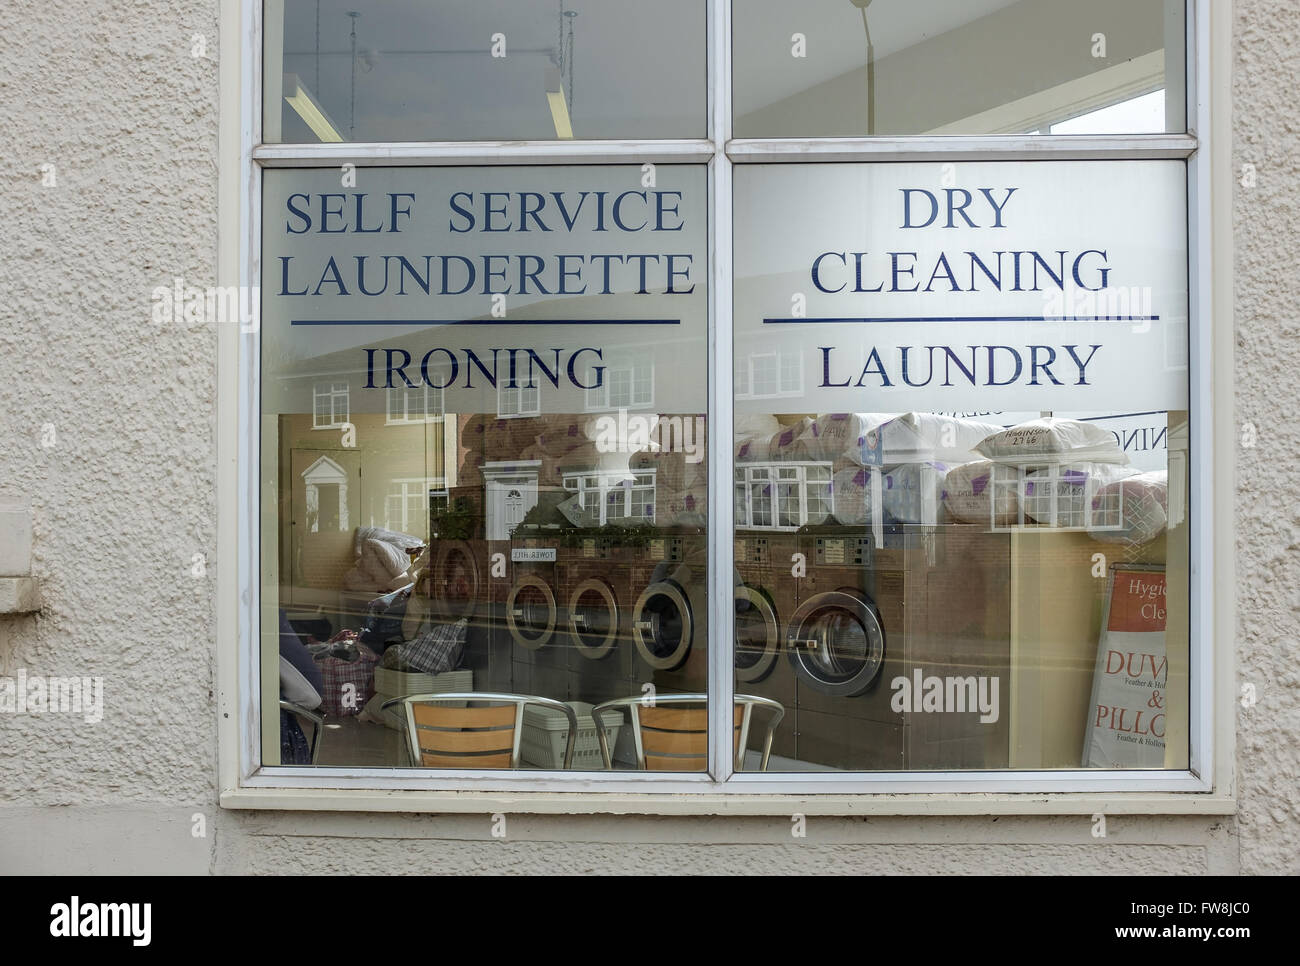 Self Service Lauderette & Dry Cleaning Service Stock Photo